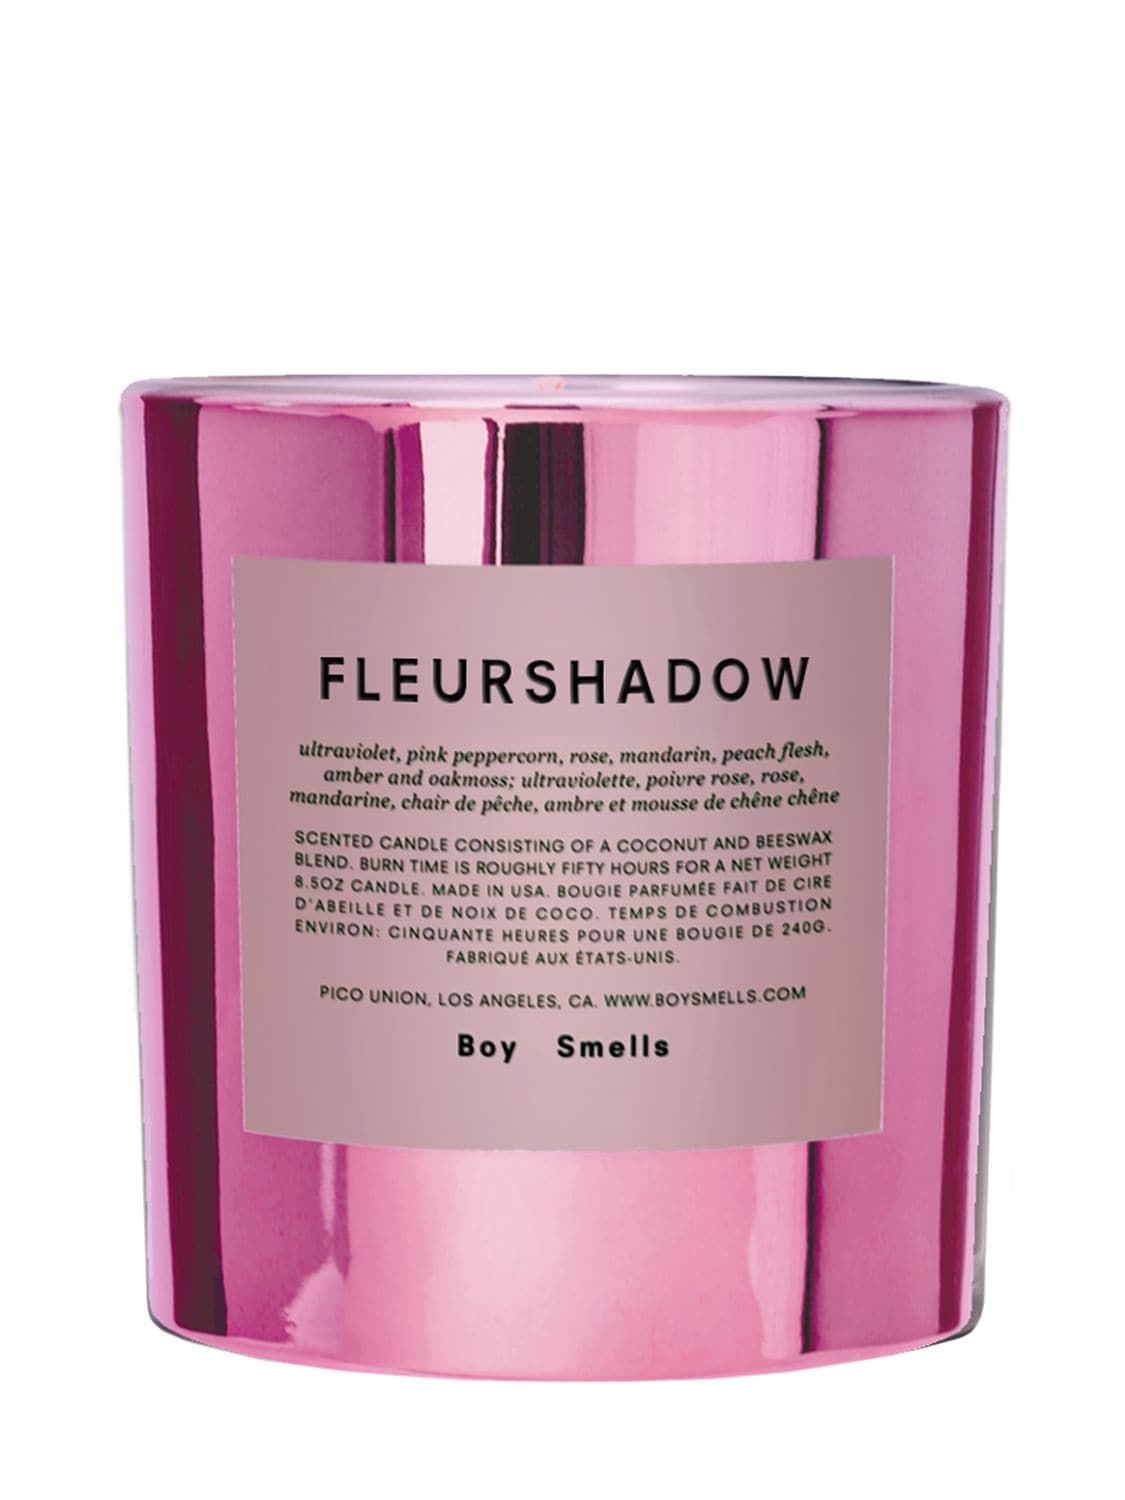 Image of 240g Fleurshadow Scented Candle